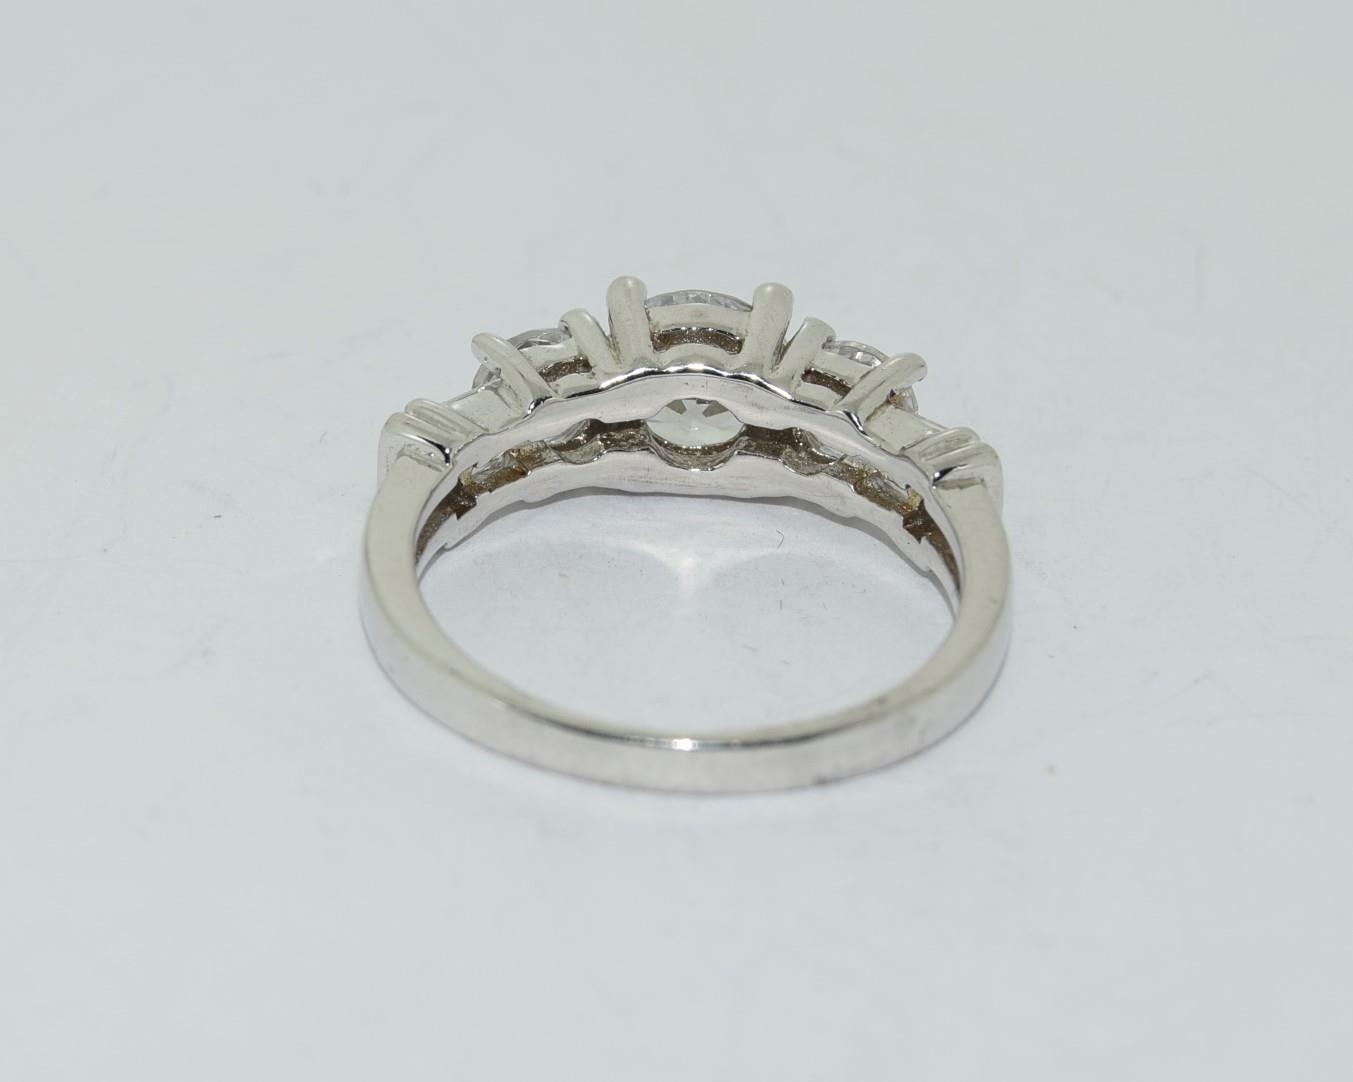 Silver and cz dress ring stamped 925 - Image 3 of 3